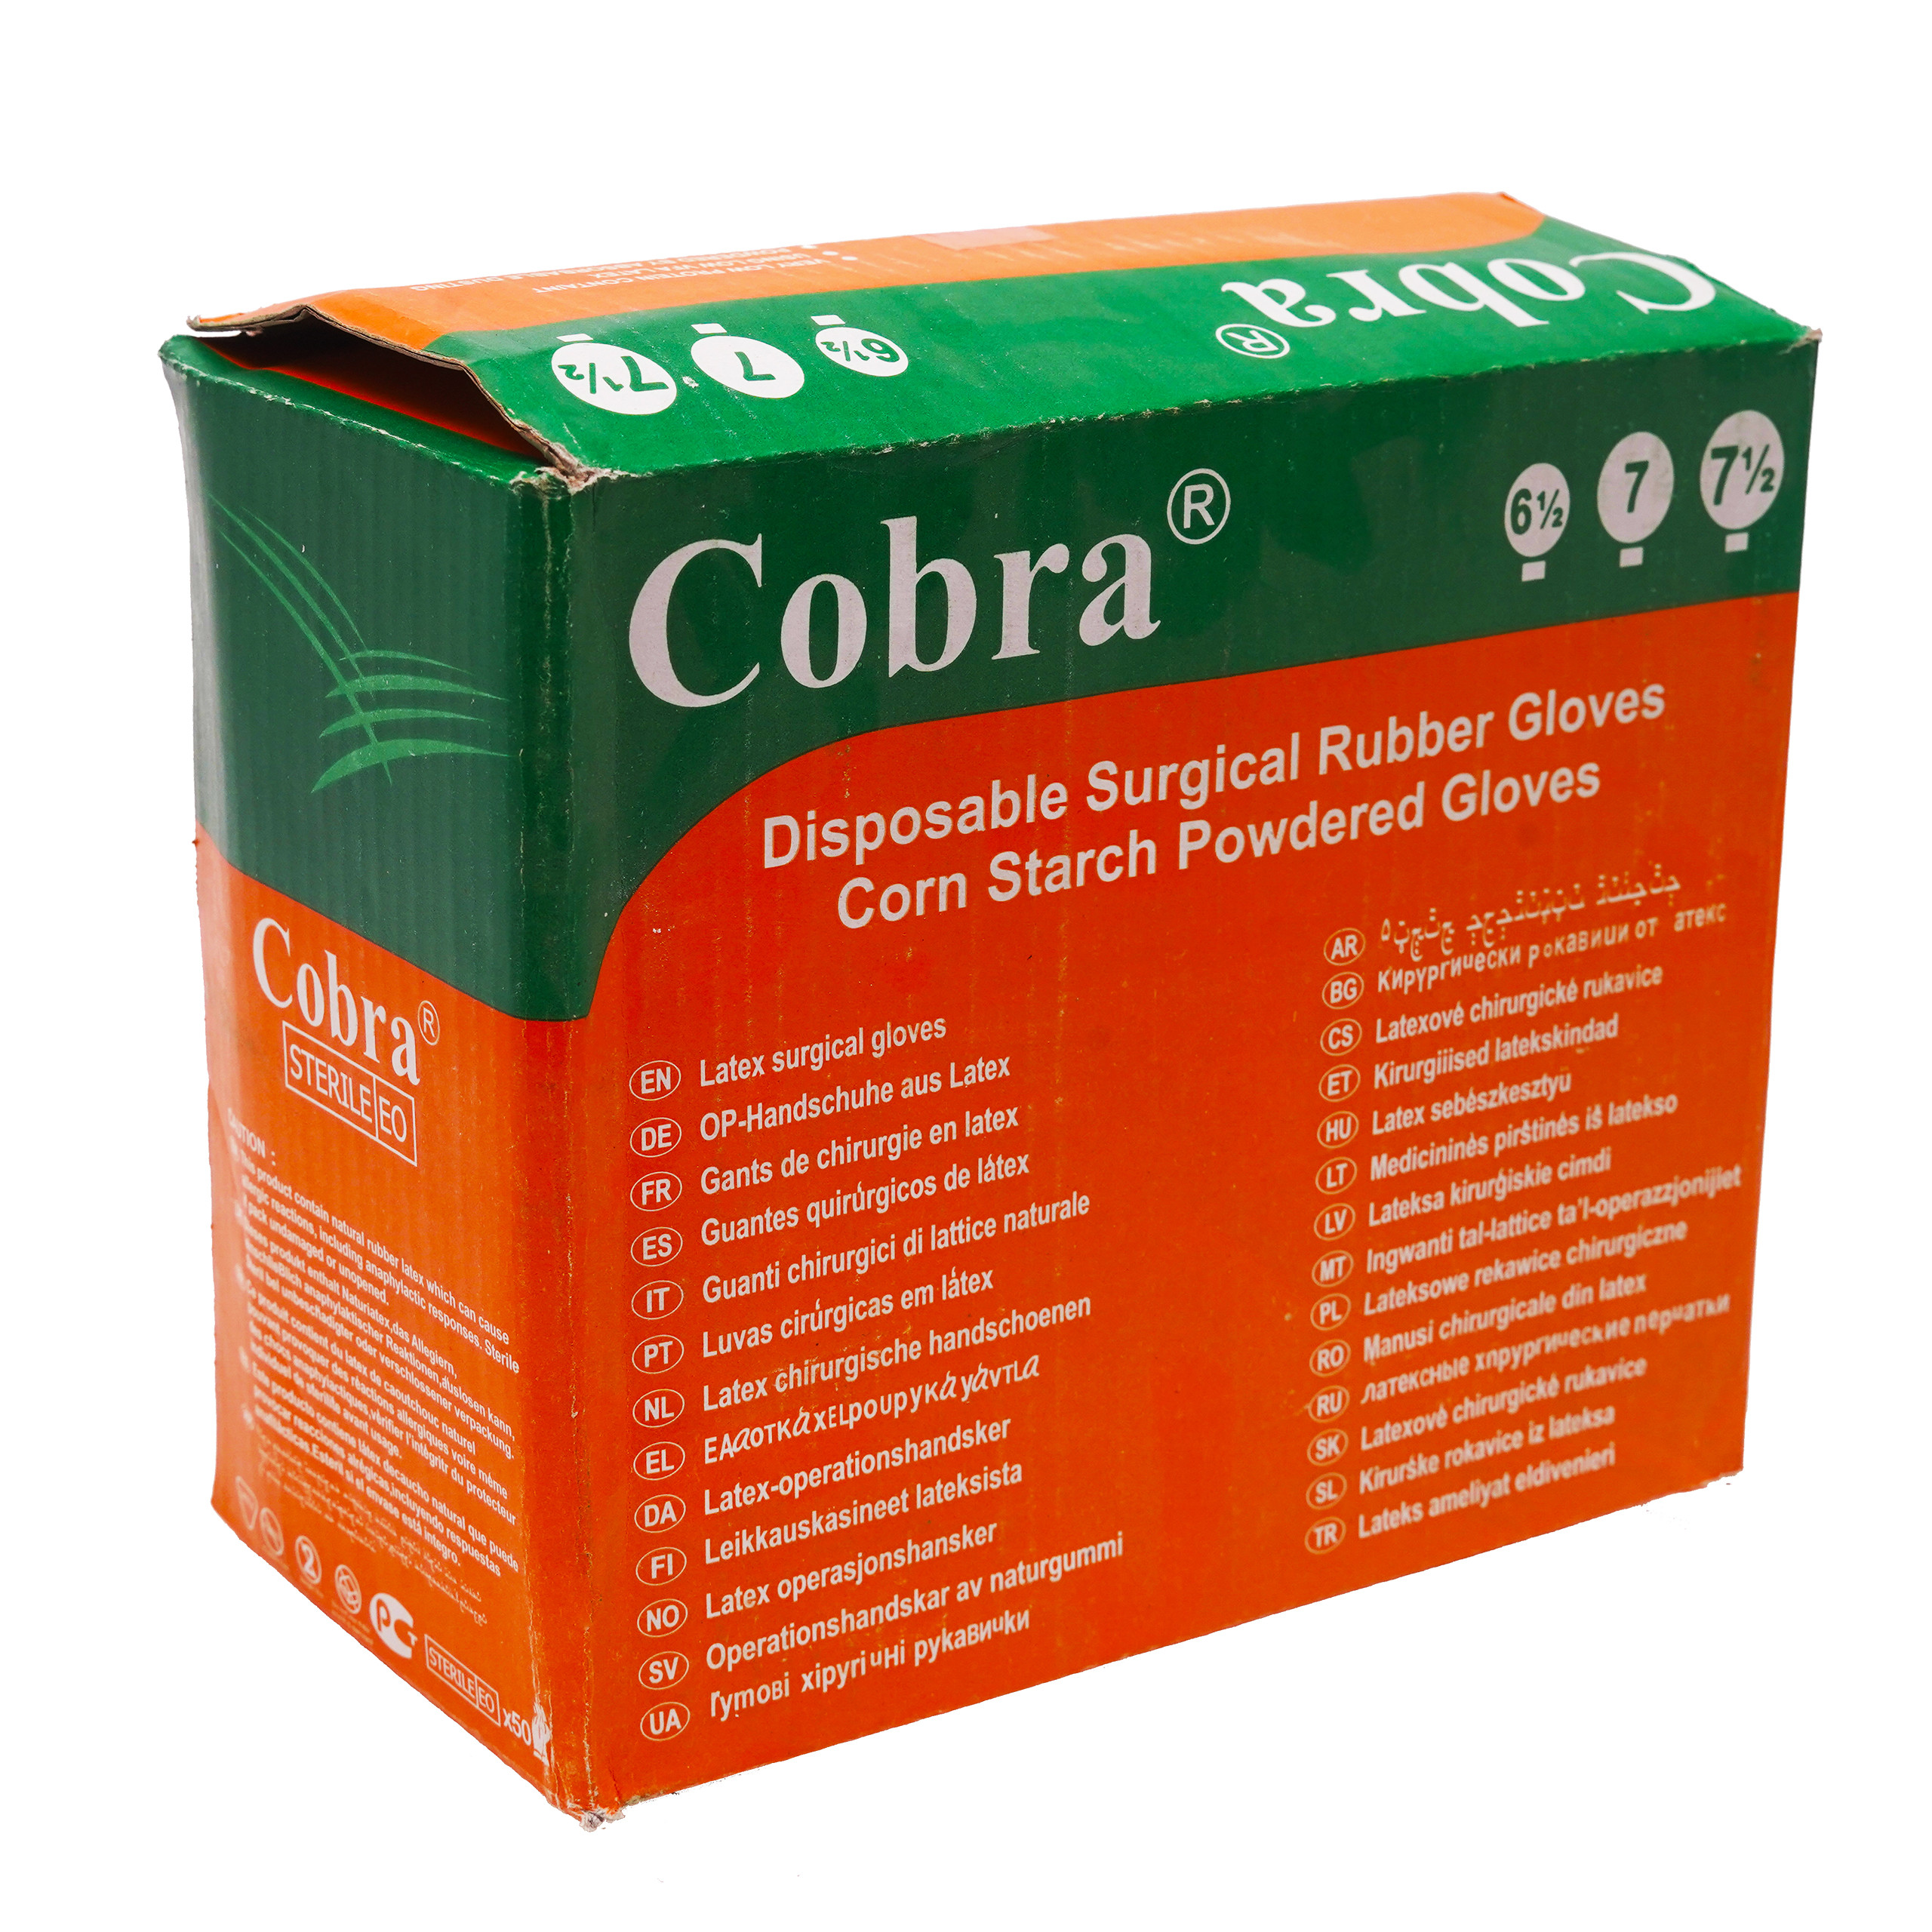 Cobra Disposable Surgical Rubber Gloves (Corn Starch Powdered Gloves) (50 Sterilized Pairs)